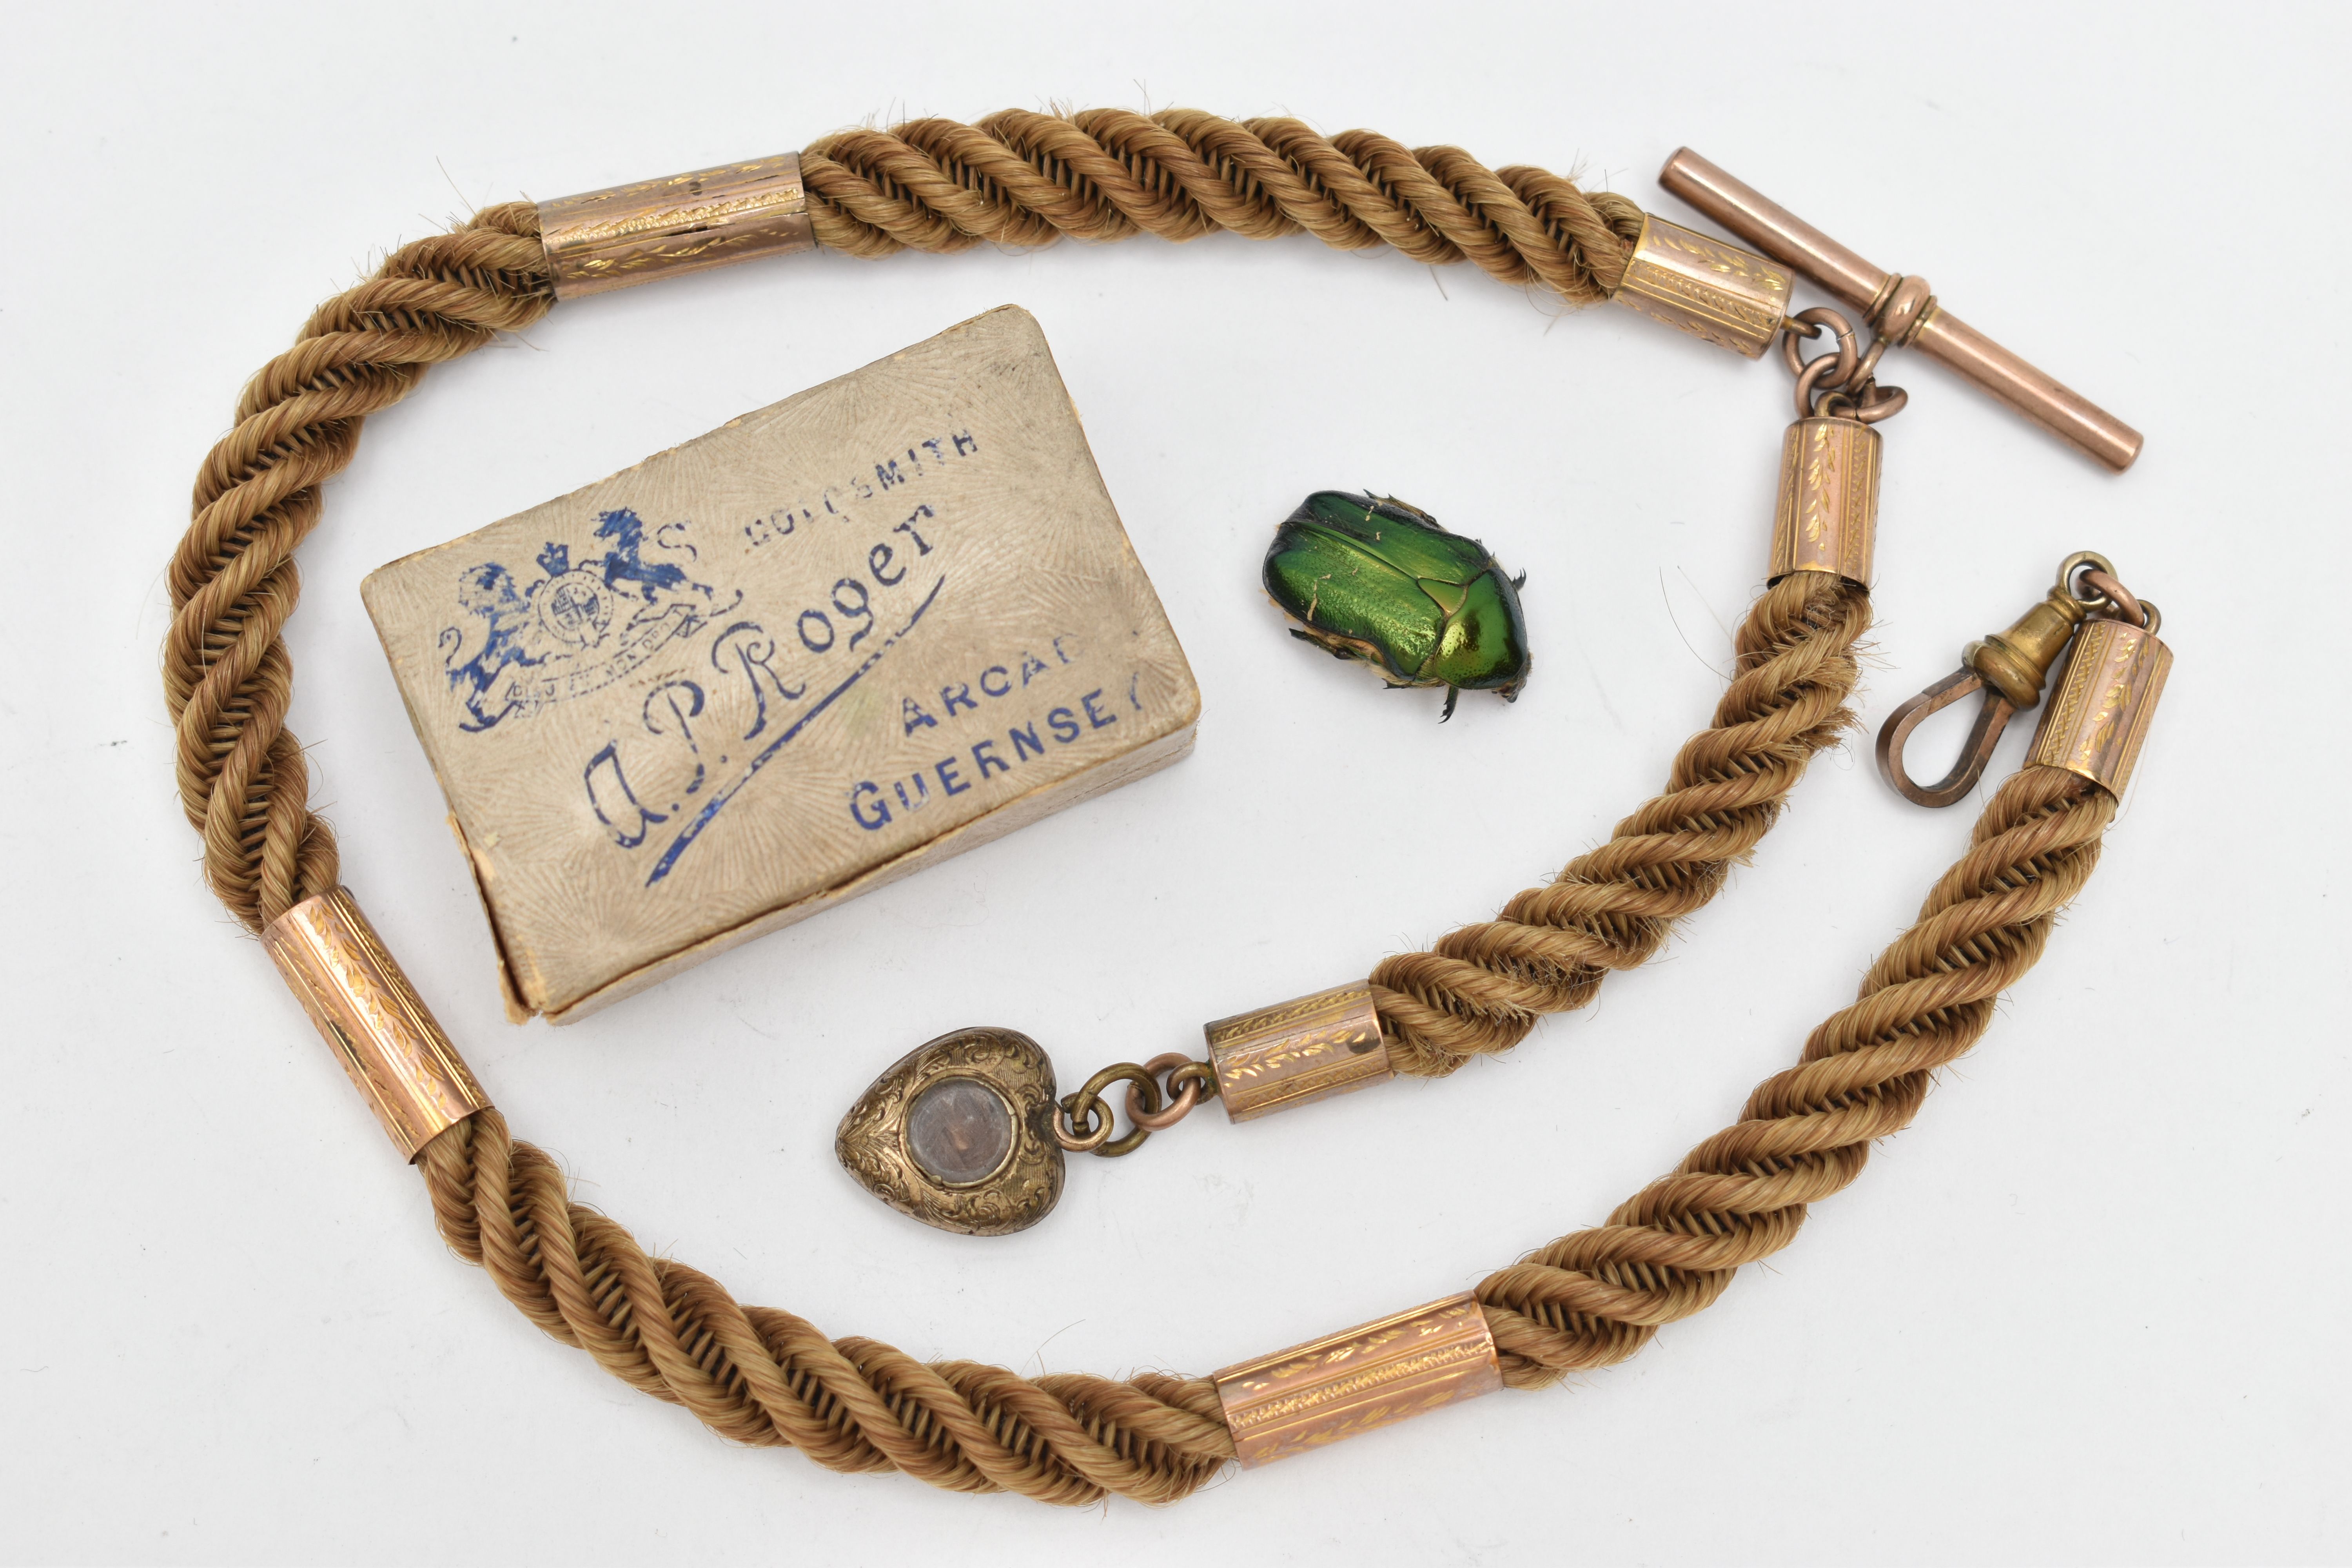 A VICTORIAN ALBERT CHAIN AND SCARAB BEETLE, a finely woven hair Albert chain with yellow metal